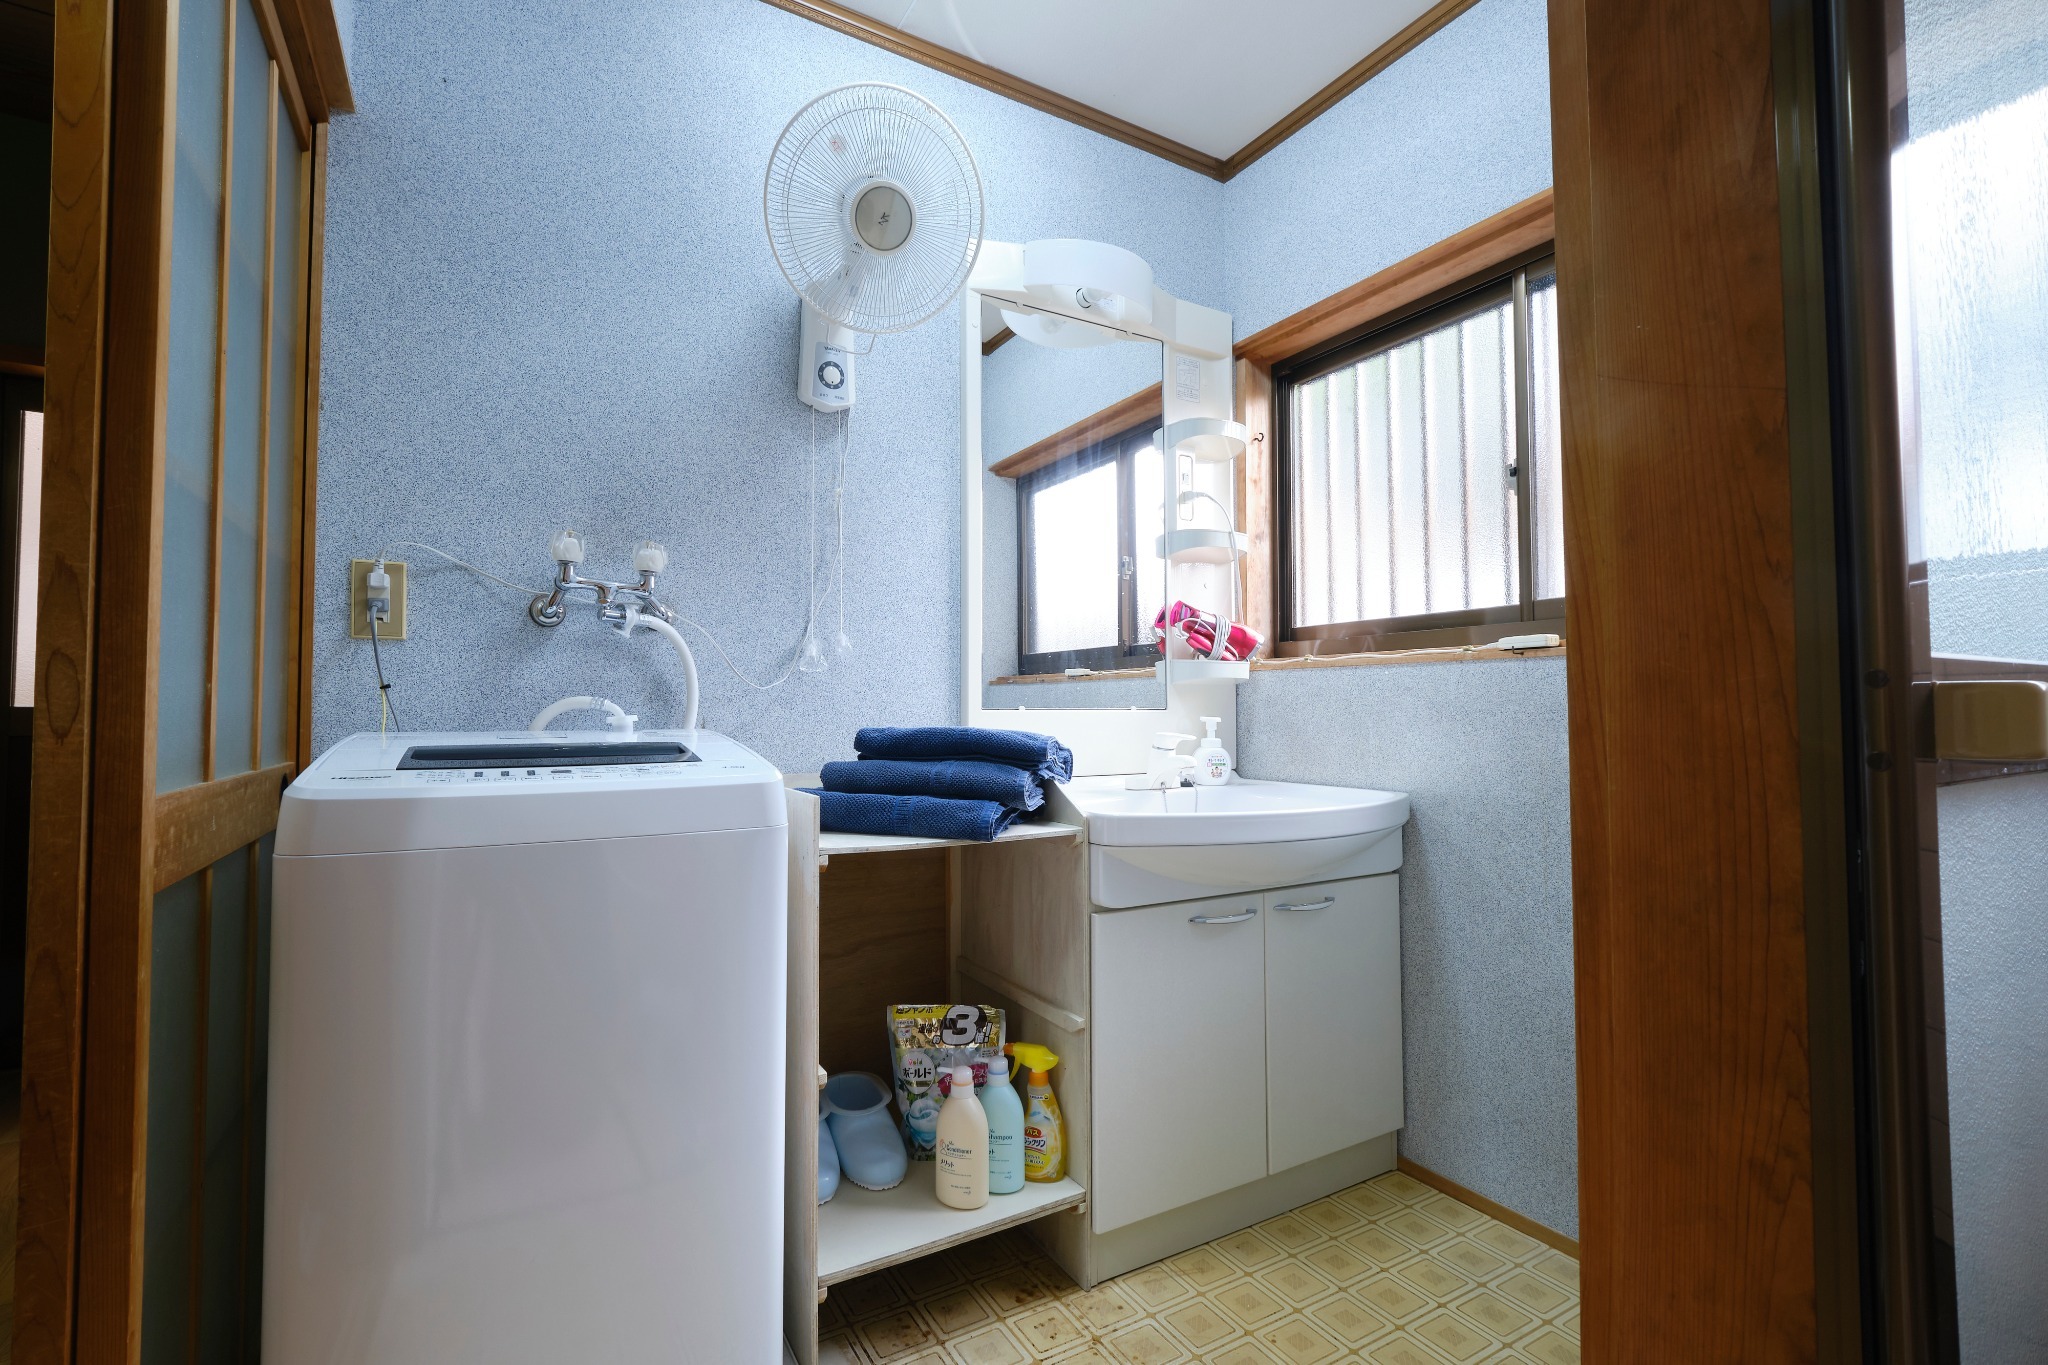 The wash room. You can use the washing machine if you want. 洗面所です。洗濯機はご自由にご使用ください。